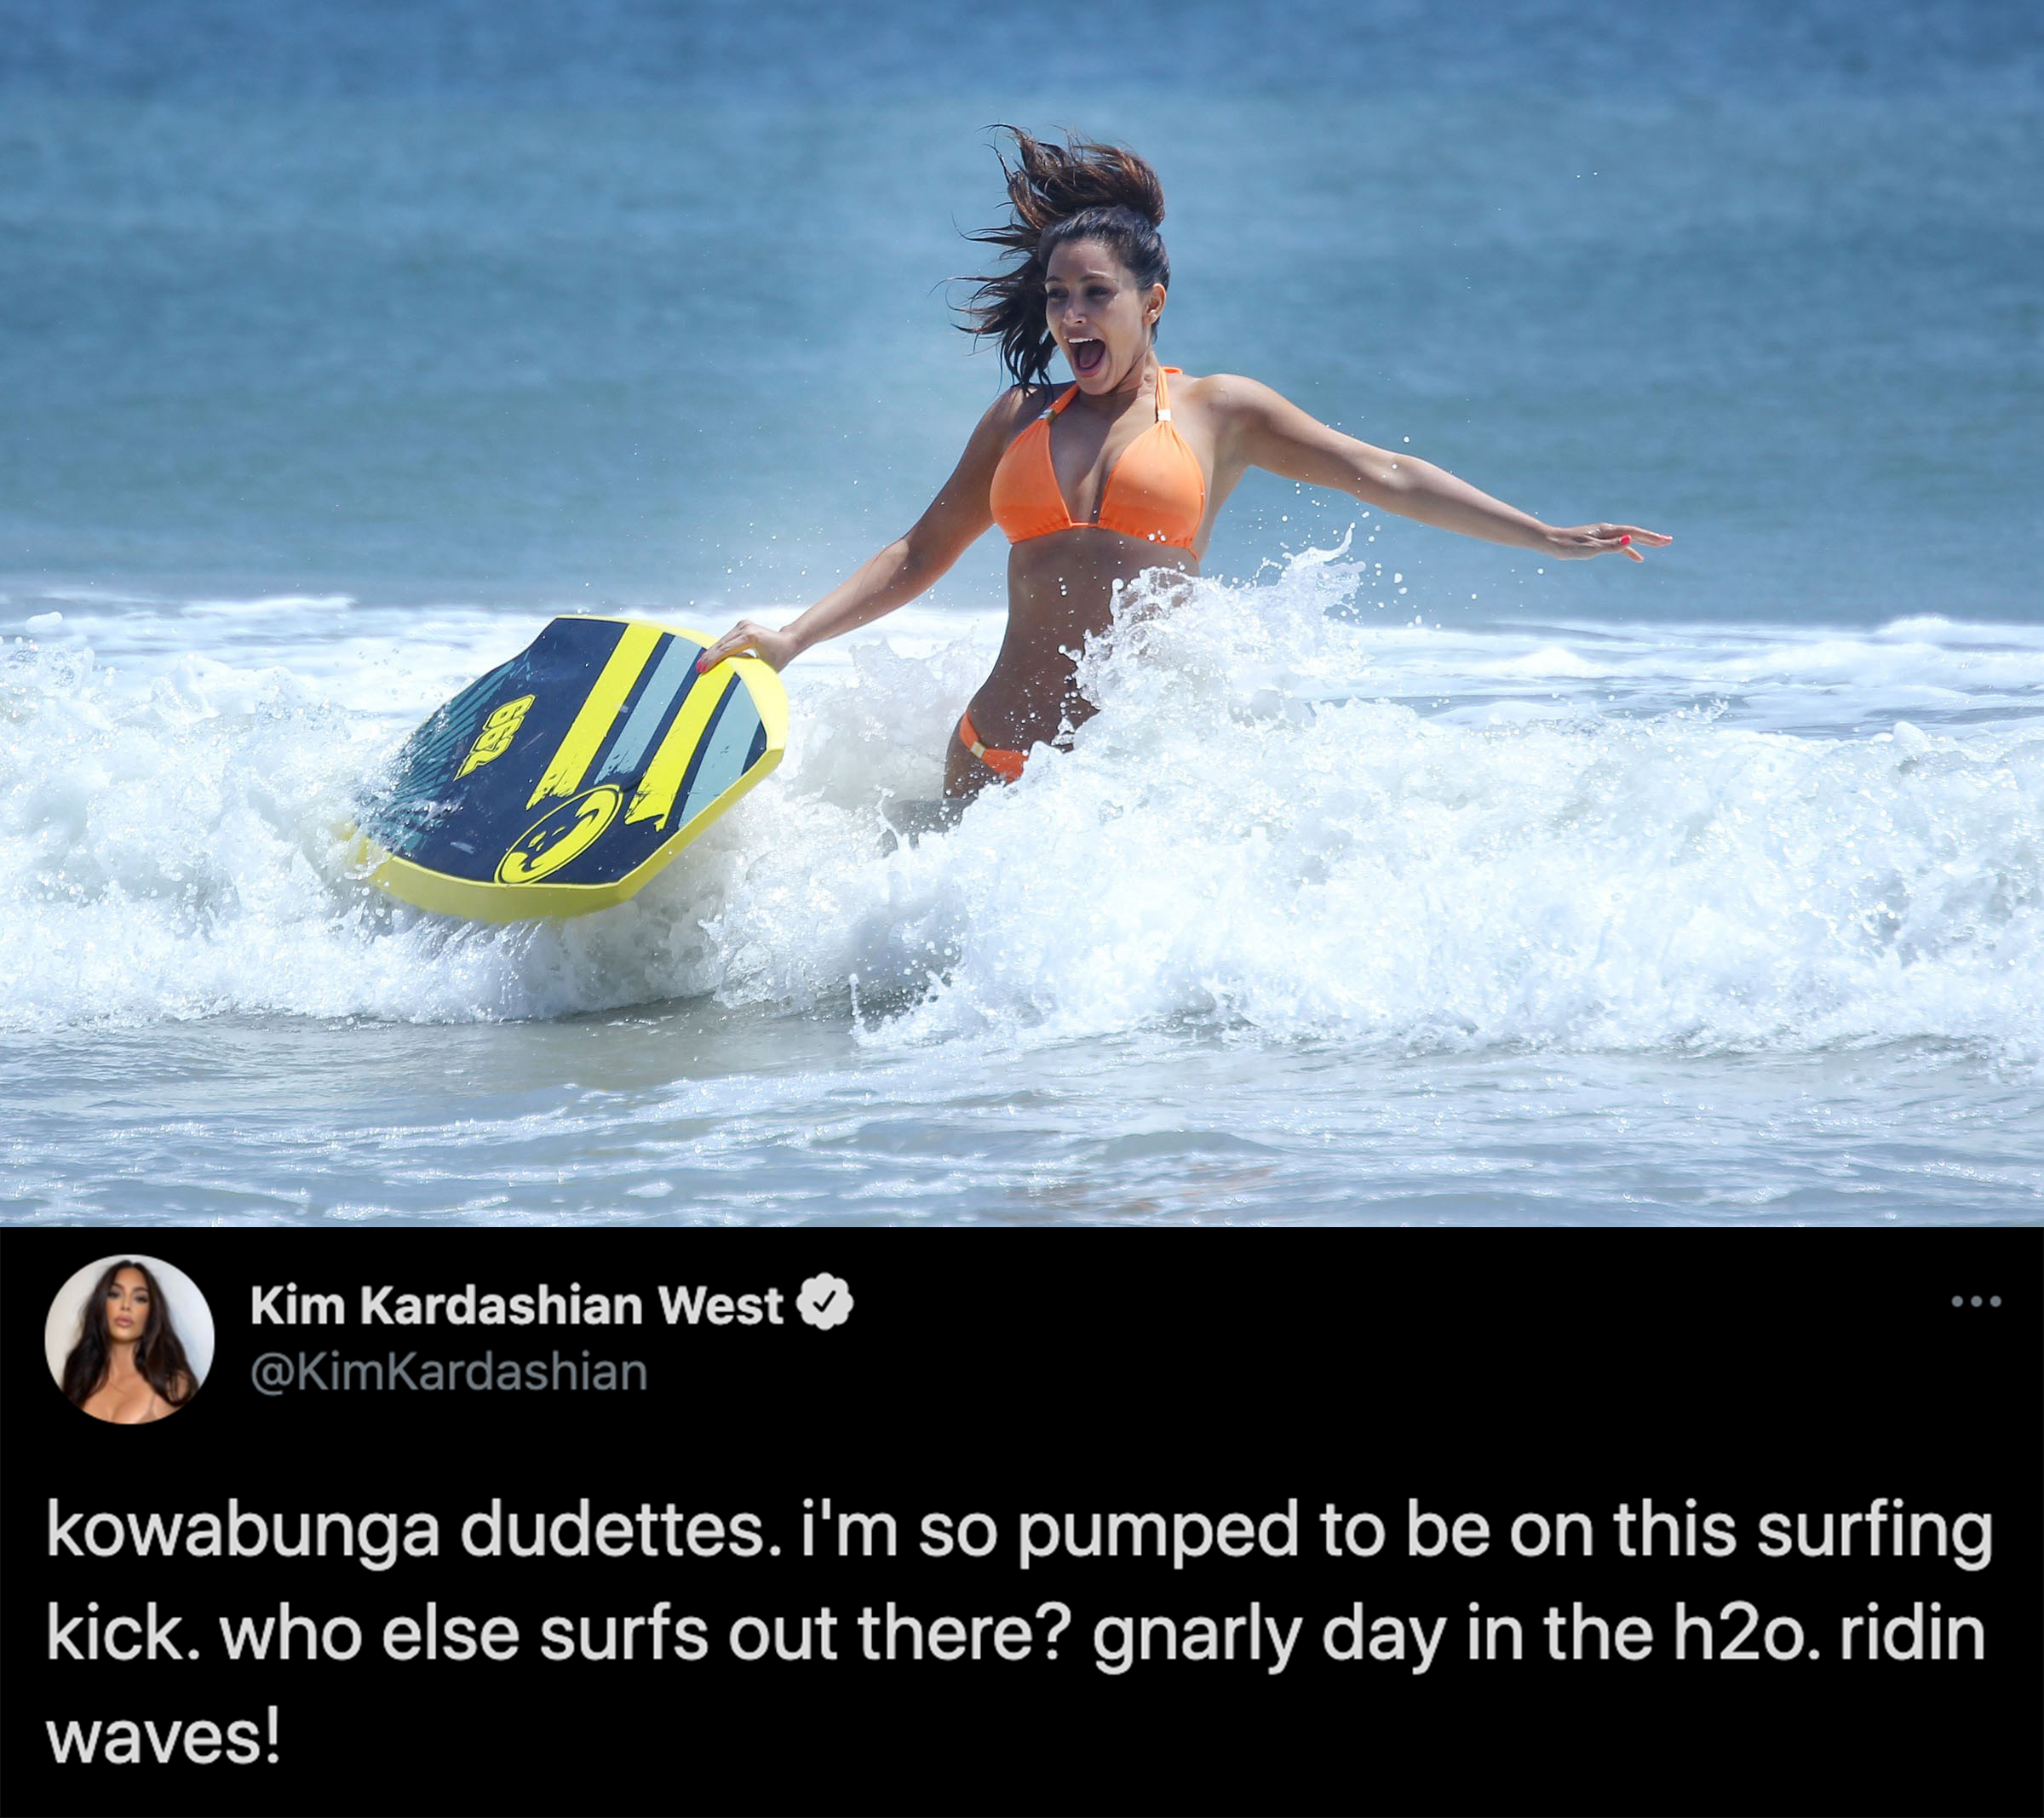 funny celebrity tweets - Kim Kardashian West kowabunga dudettes. i'm so pumped to be on this surfing kick. who else surfs out there? gnarly day in the h2o. ridin waves!